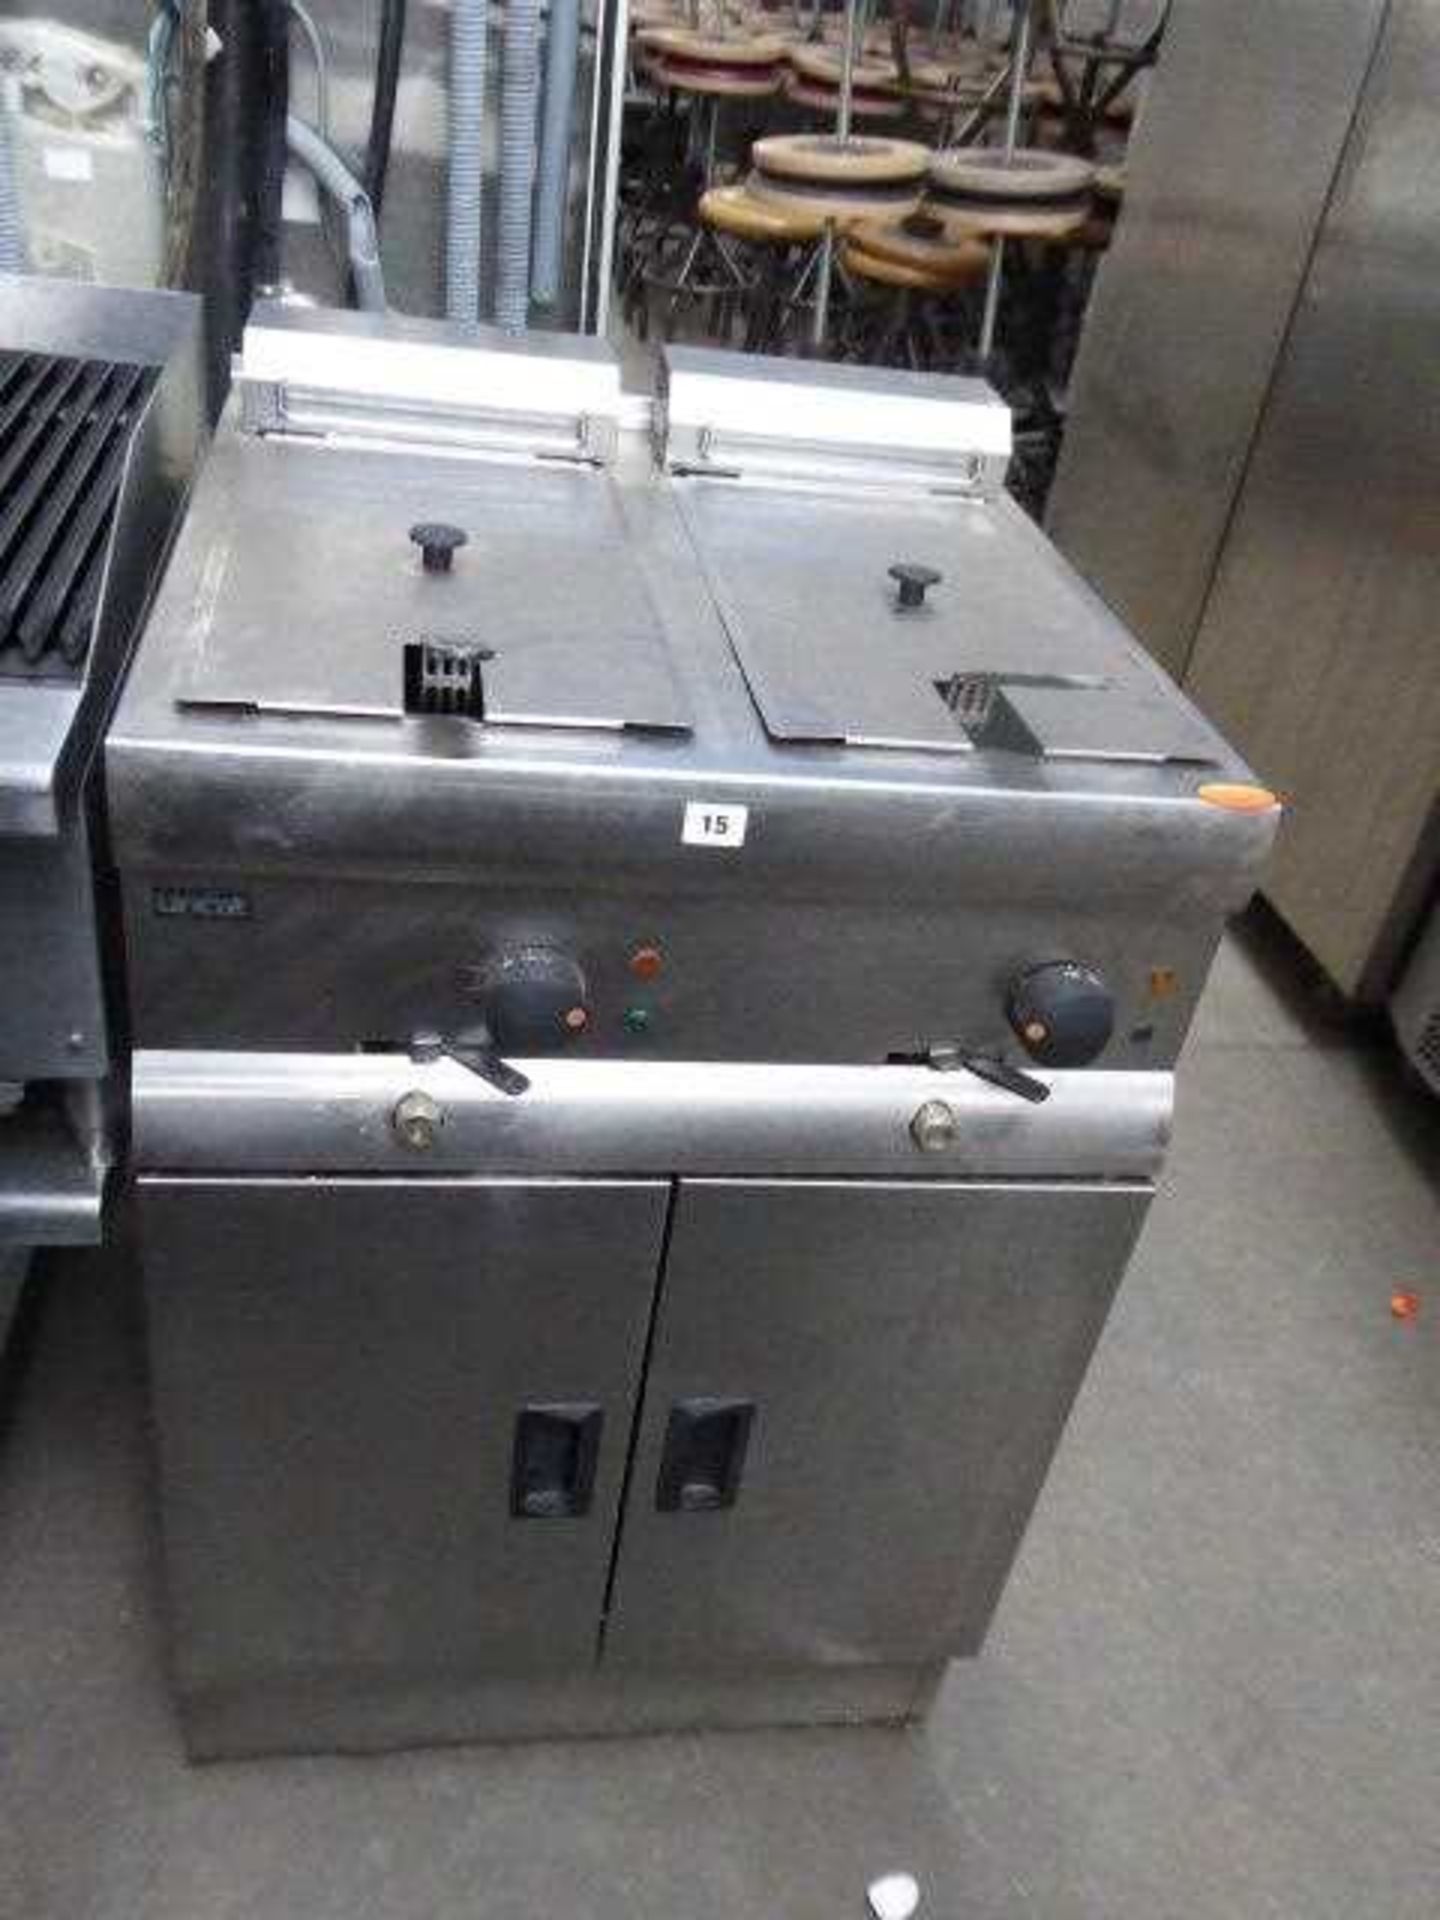 60cm electric Lincat 2 well fryer with 2 baskets - Image 2 of 3